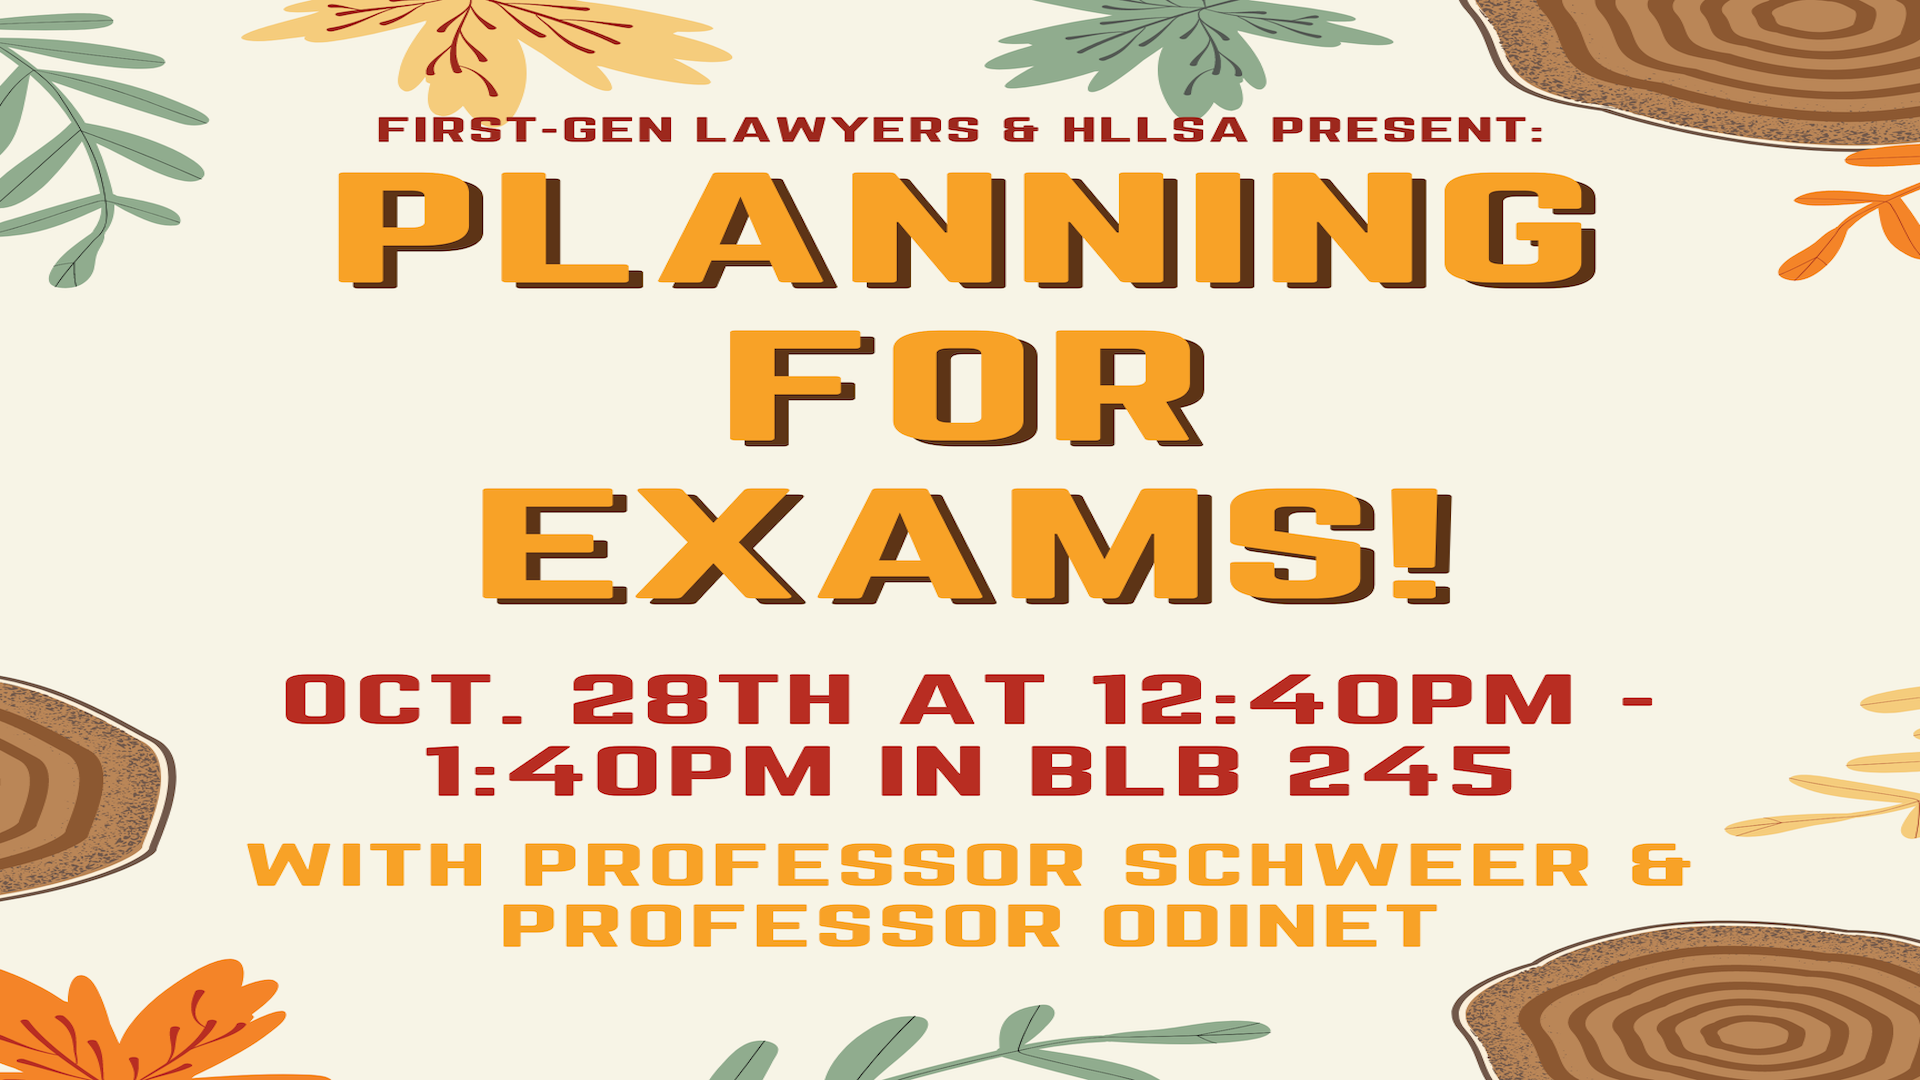  First Gen Lawyers & HLLSA Present: Planning For Exams!    Oct. 28th at 12:40pm - 1:40pm in BLB 245        With Professor Schweer & Professor Professor Odinet